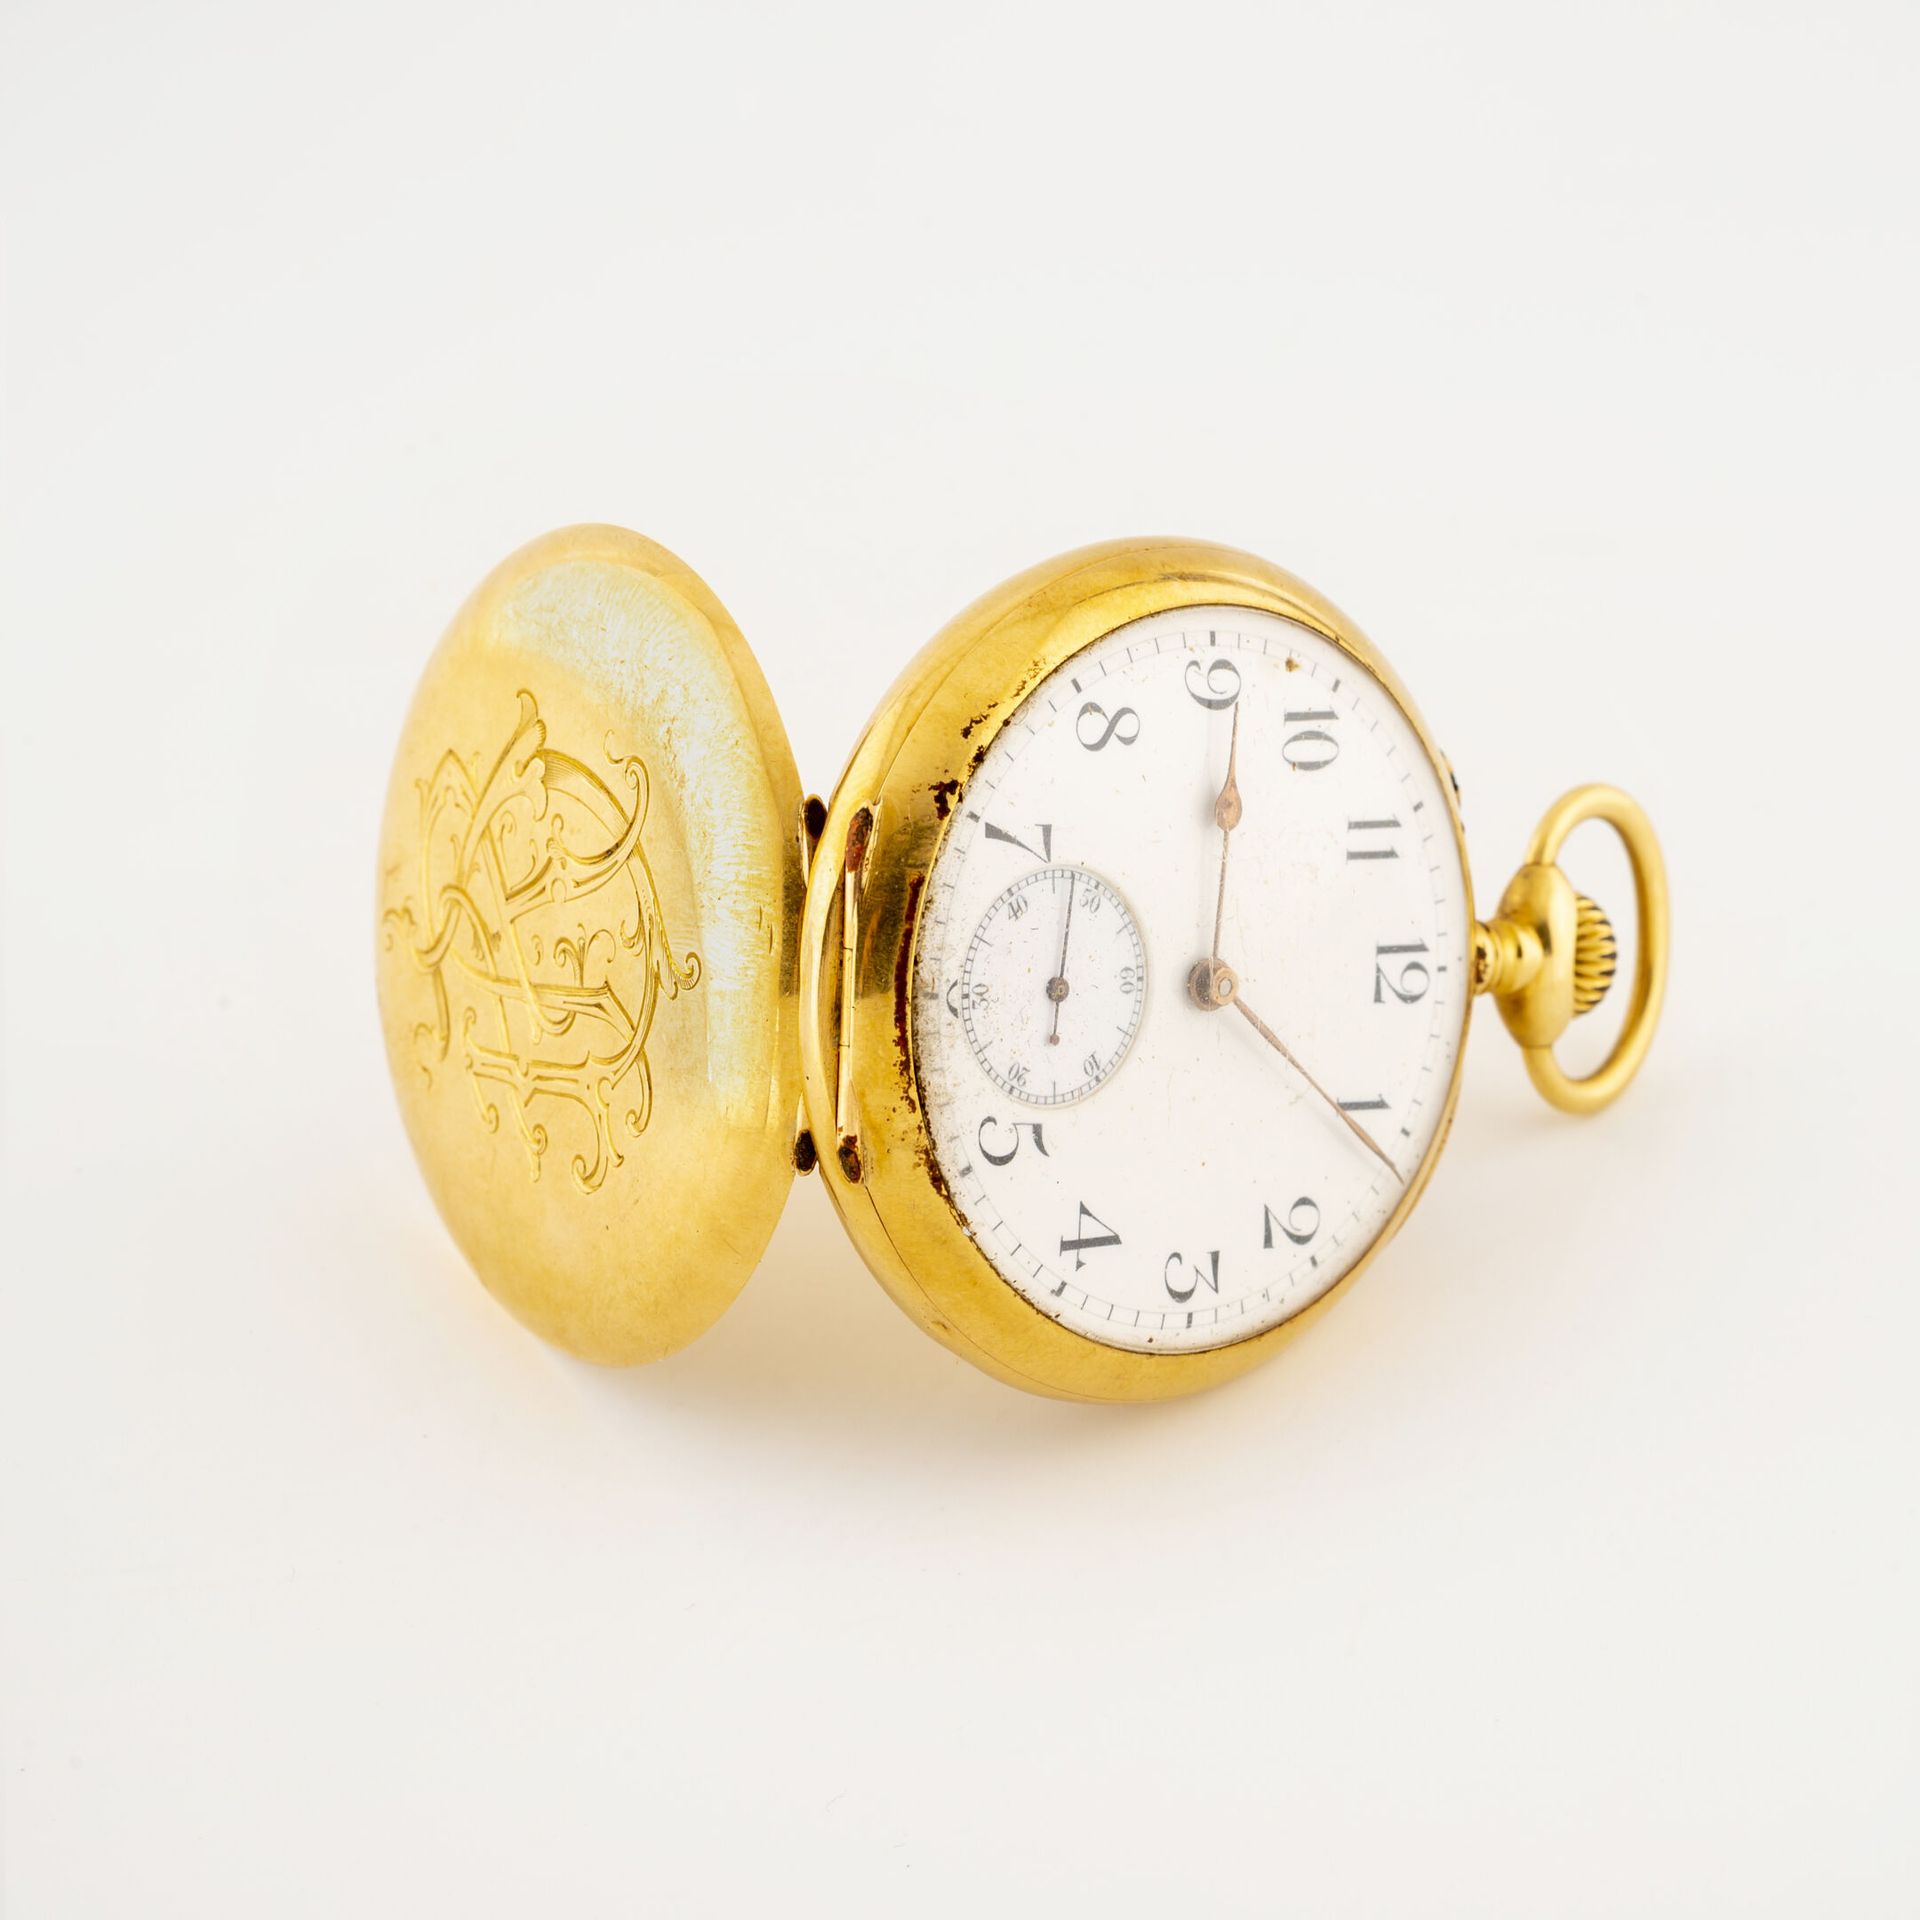 Null Yellow gold (750) pocket watch.

Encrypted back cover.

Dial with cream bac&hellip;